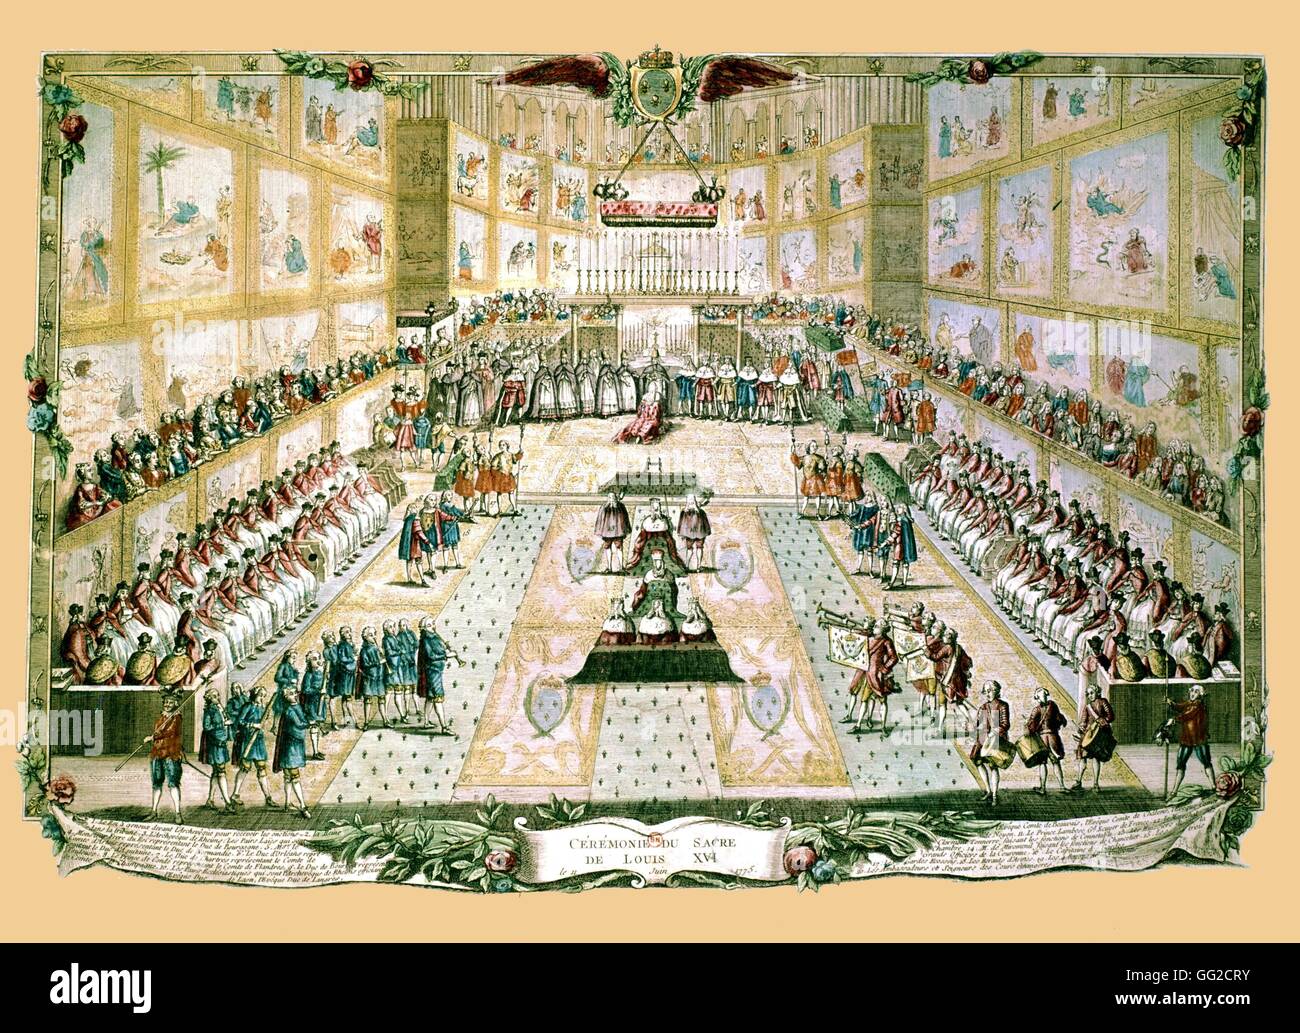 Coronation of Louis XVI. Talleyrand, whose father officiated, attended the ceremony as an underdeacon. 18th century France Stock Photo